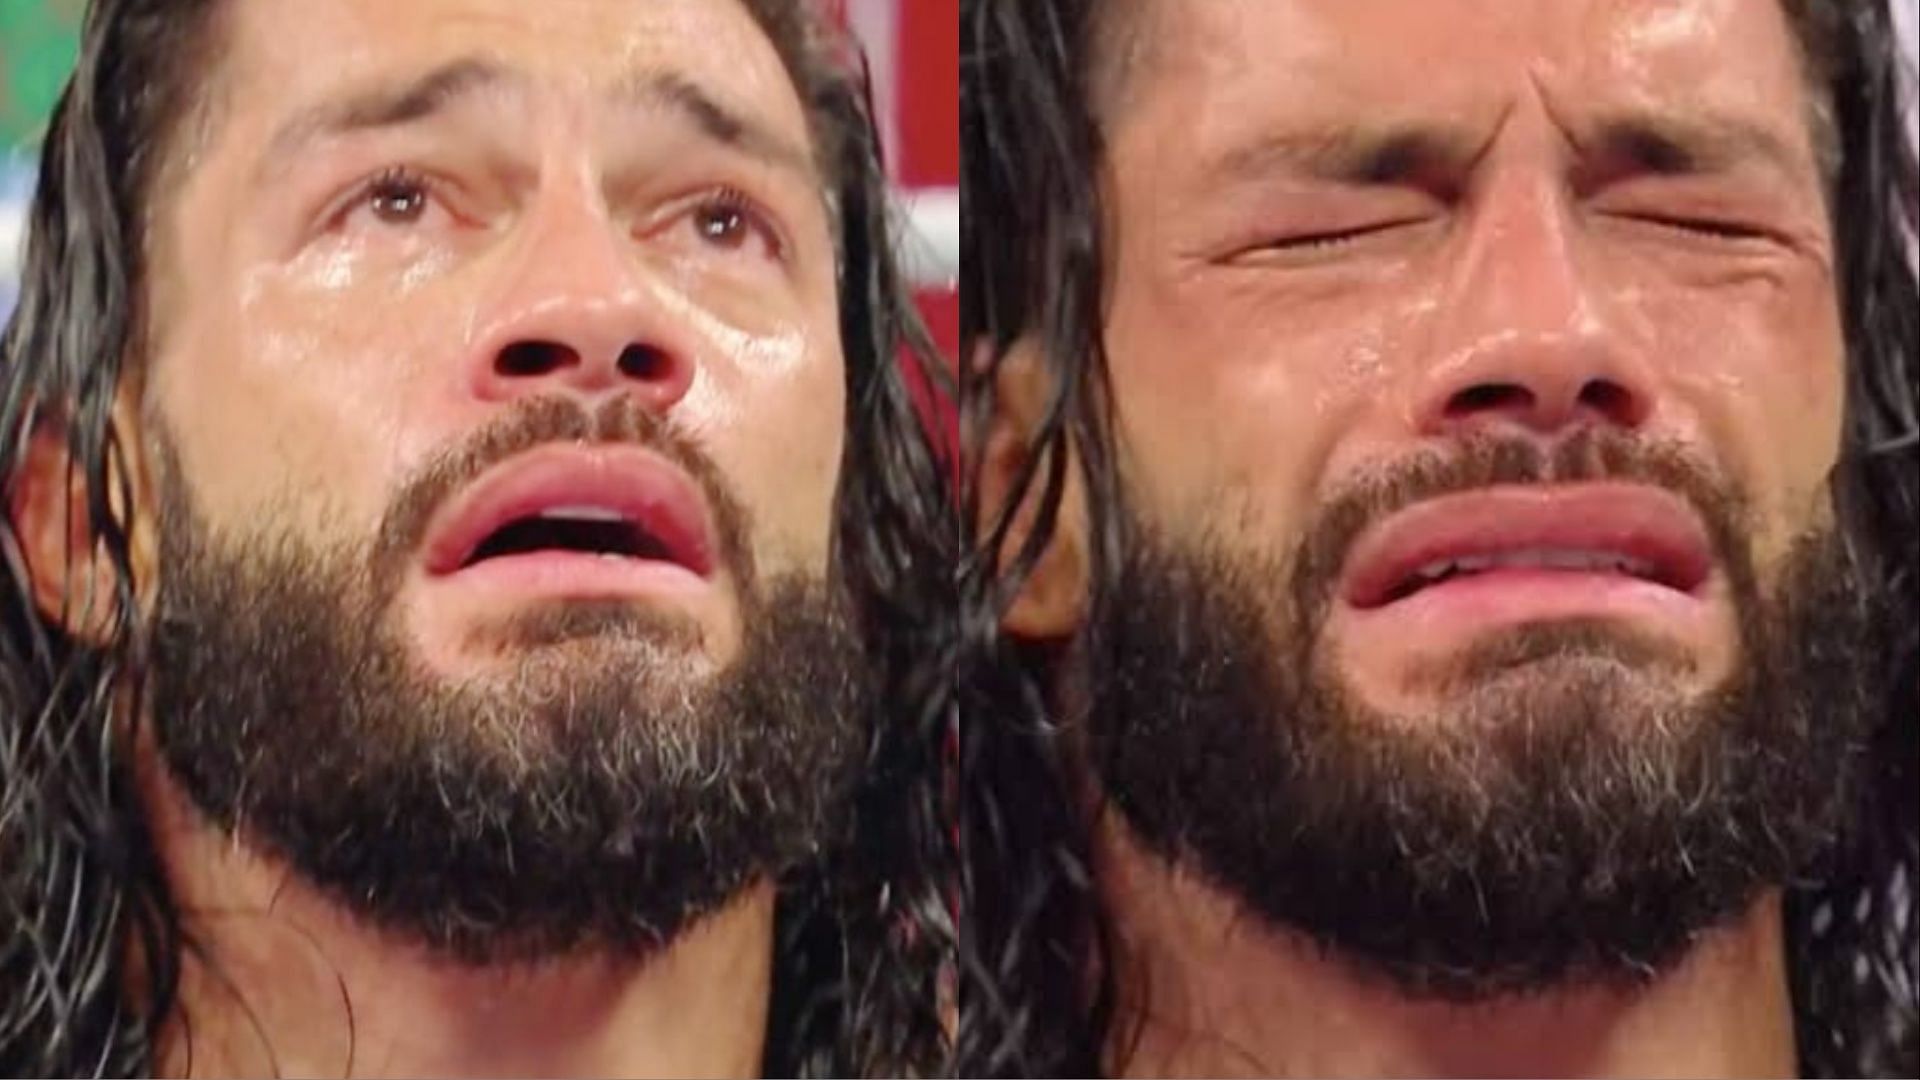 Roman Reigns lost his top spot on PWI 500 list to a fellow WWE superstar.